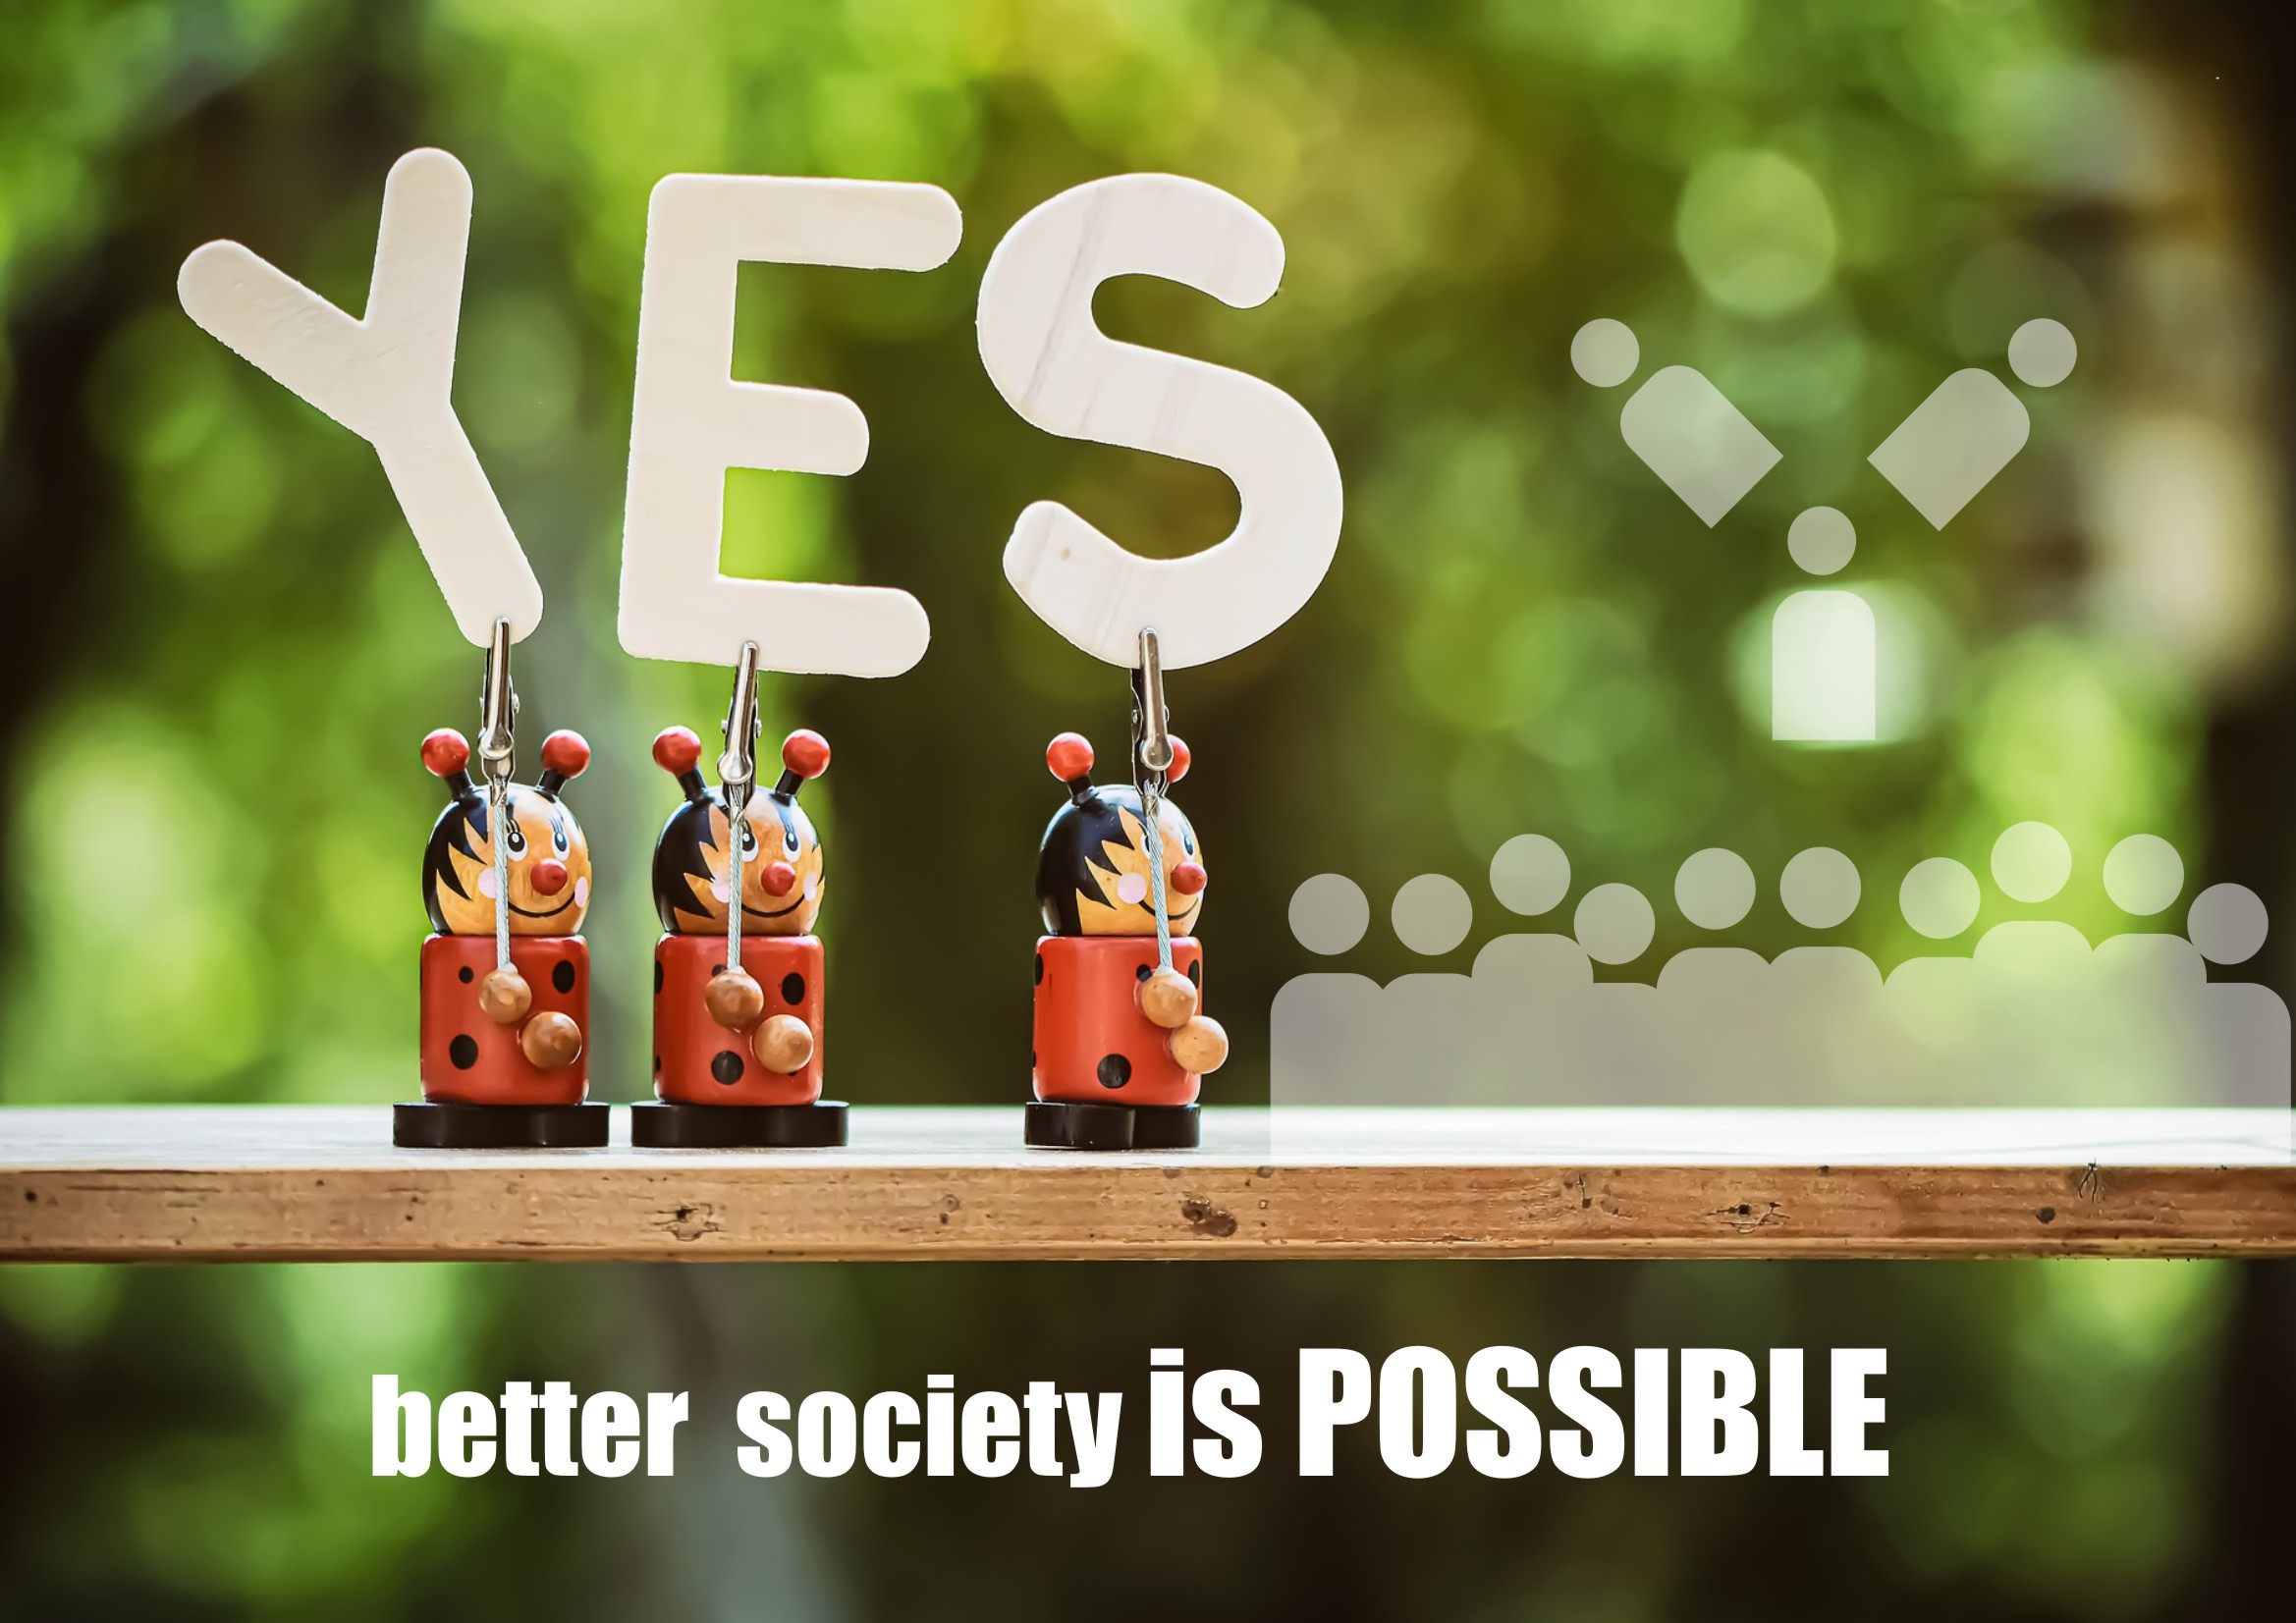 YES, better society is possible!